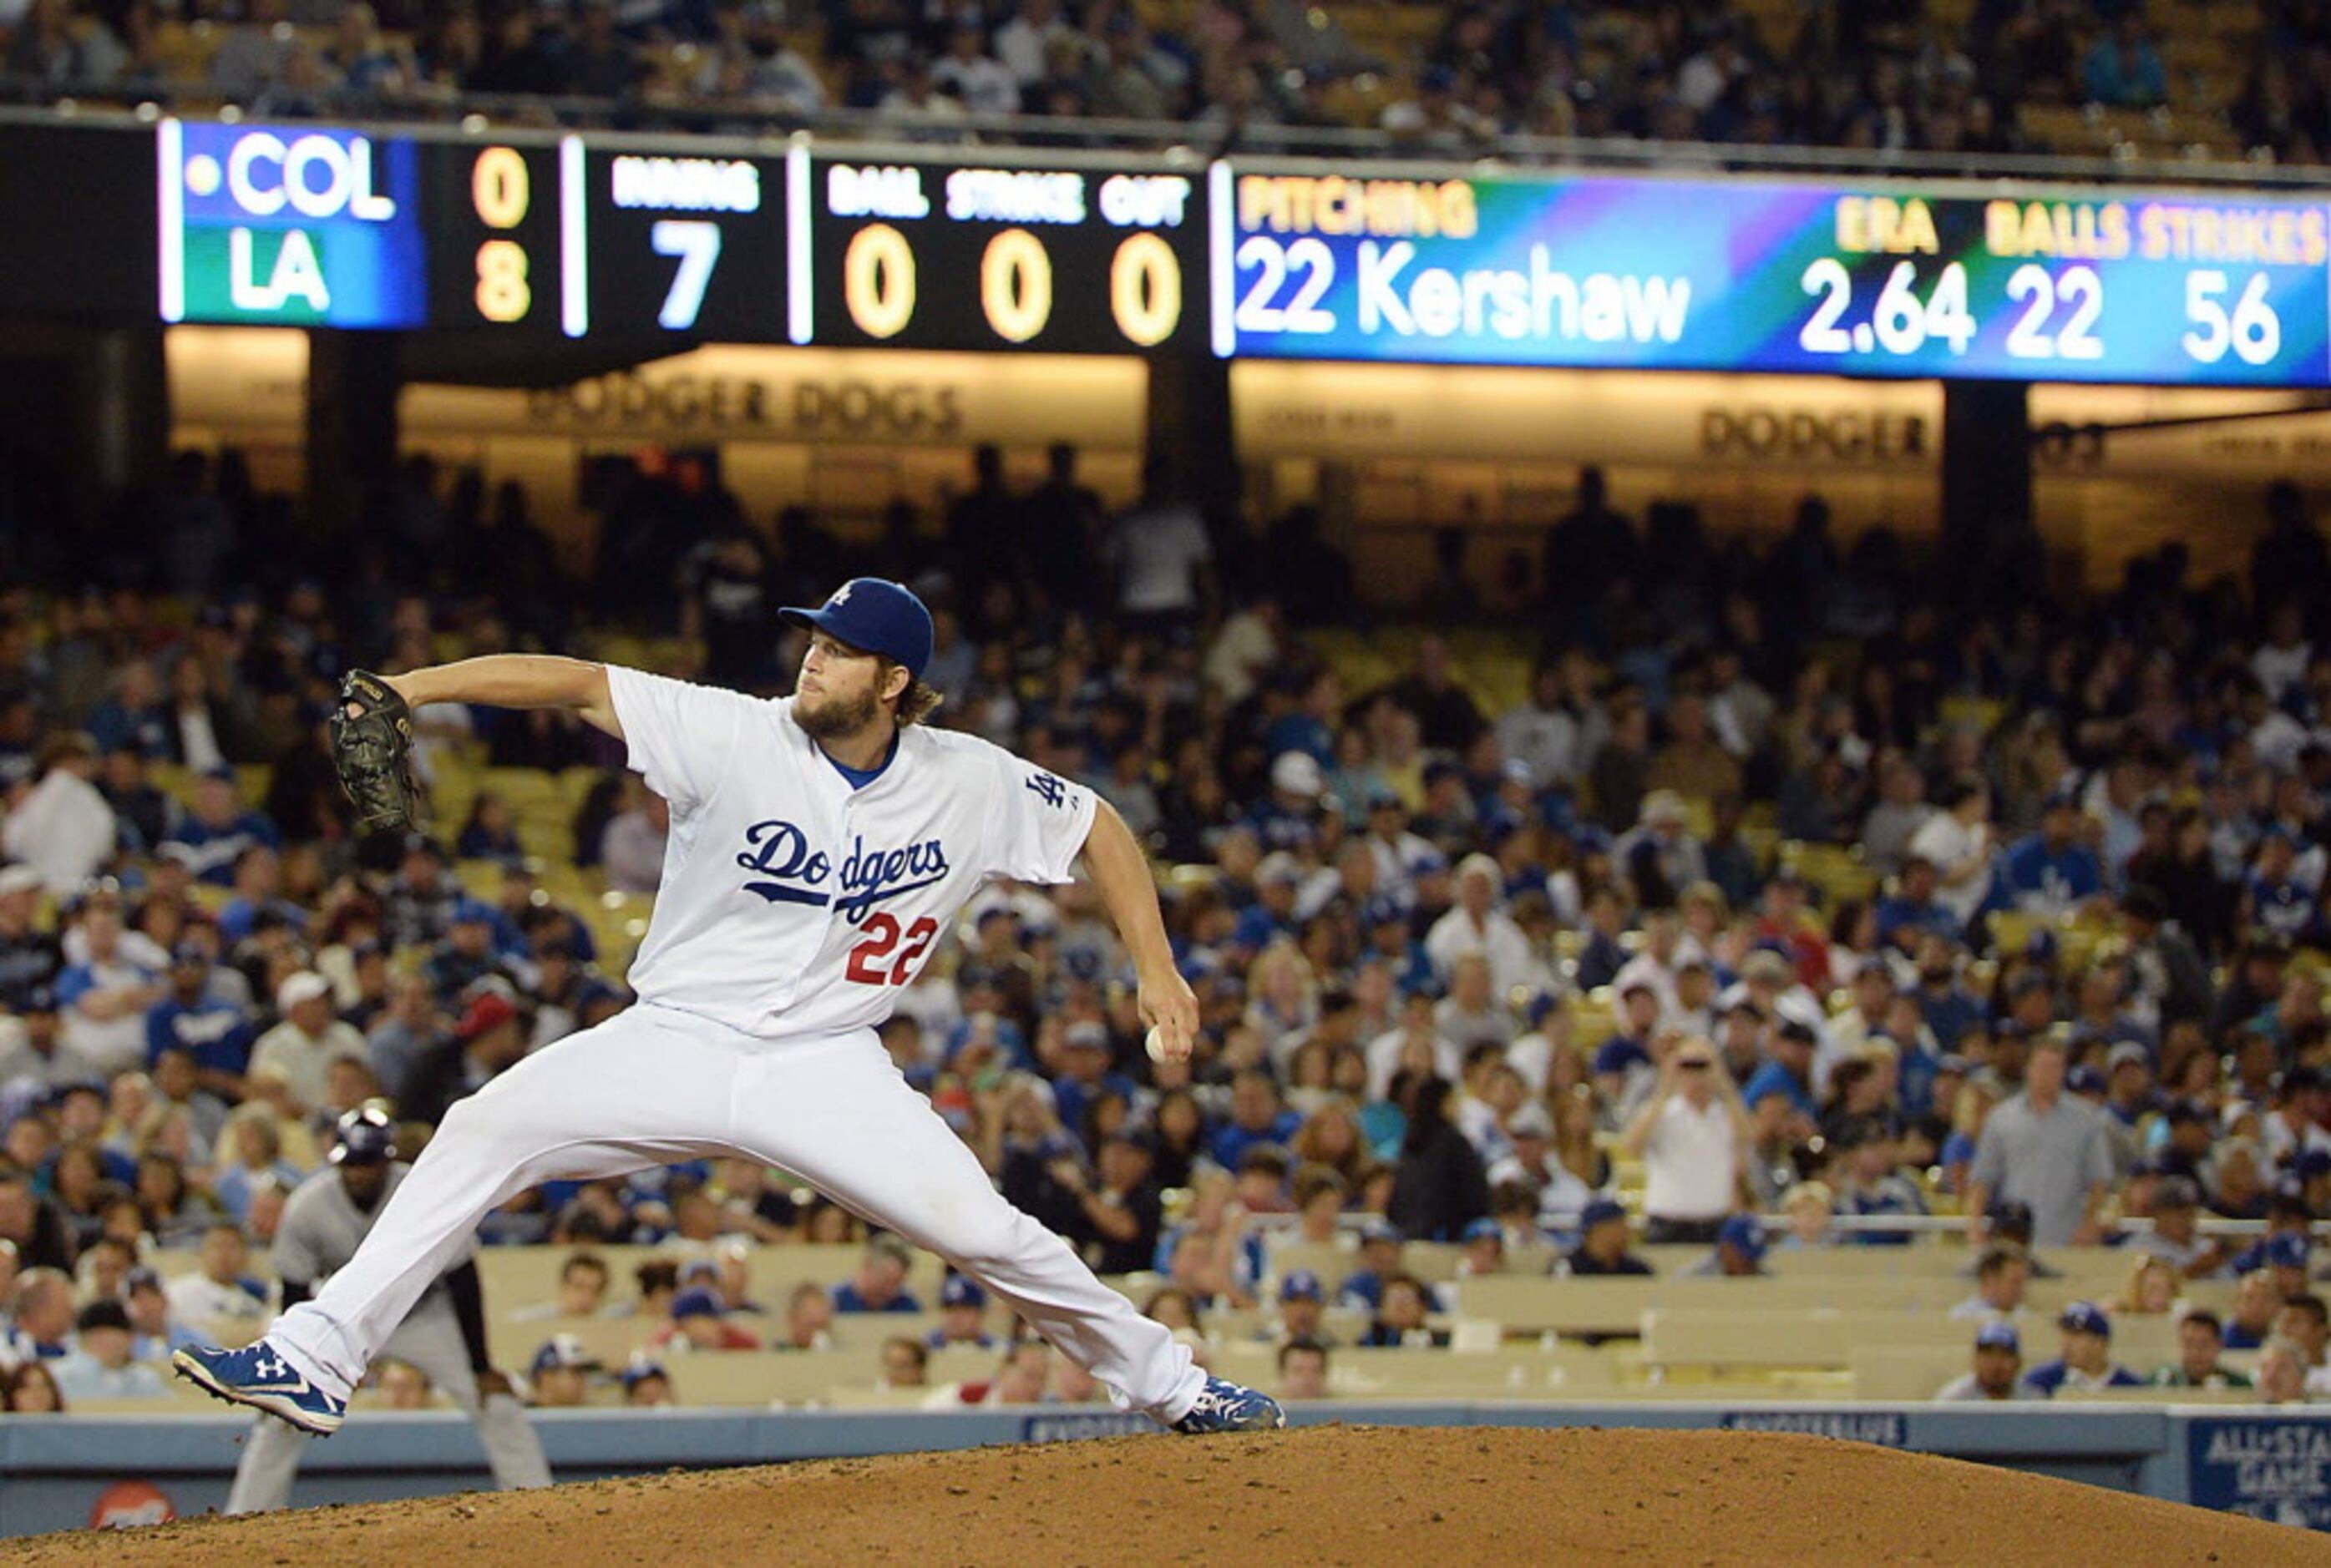 Clayton Kershaw's All-Star replacement left him a perfect thank